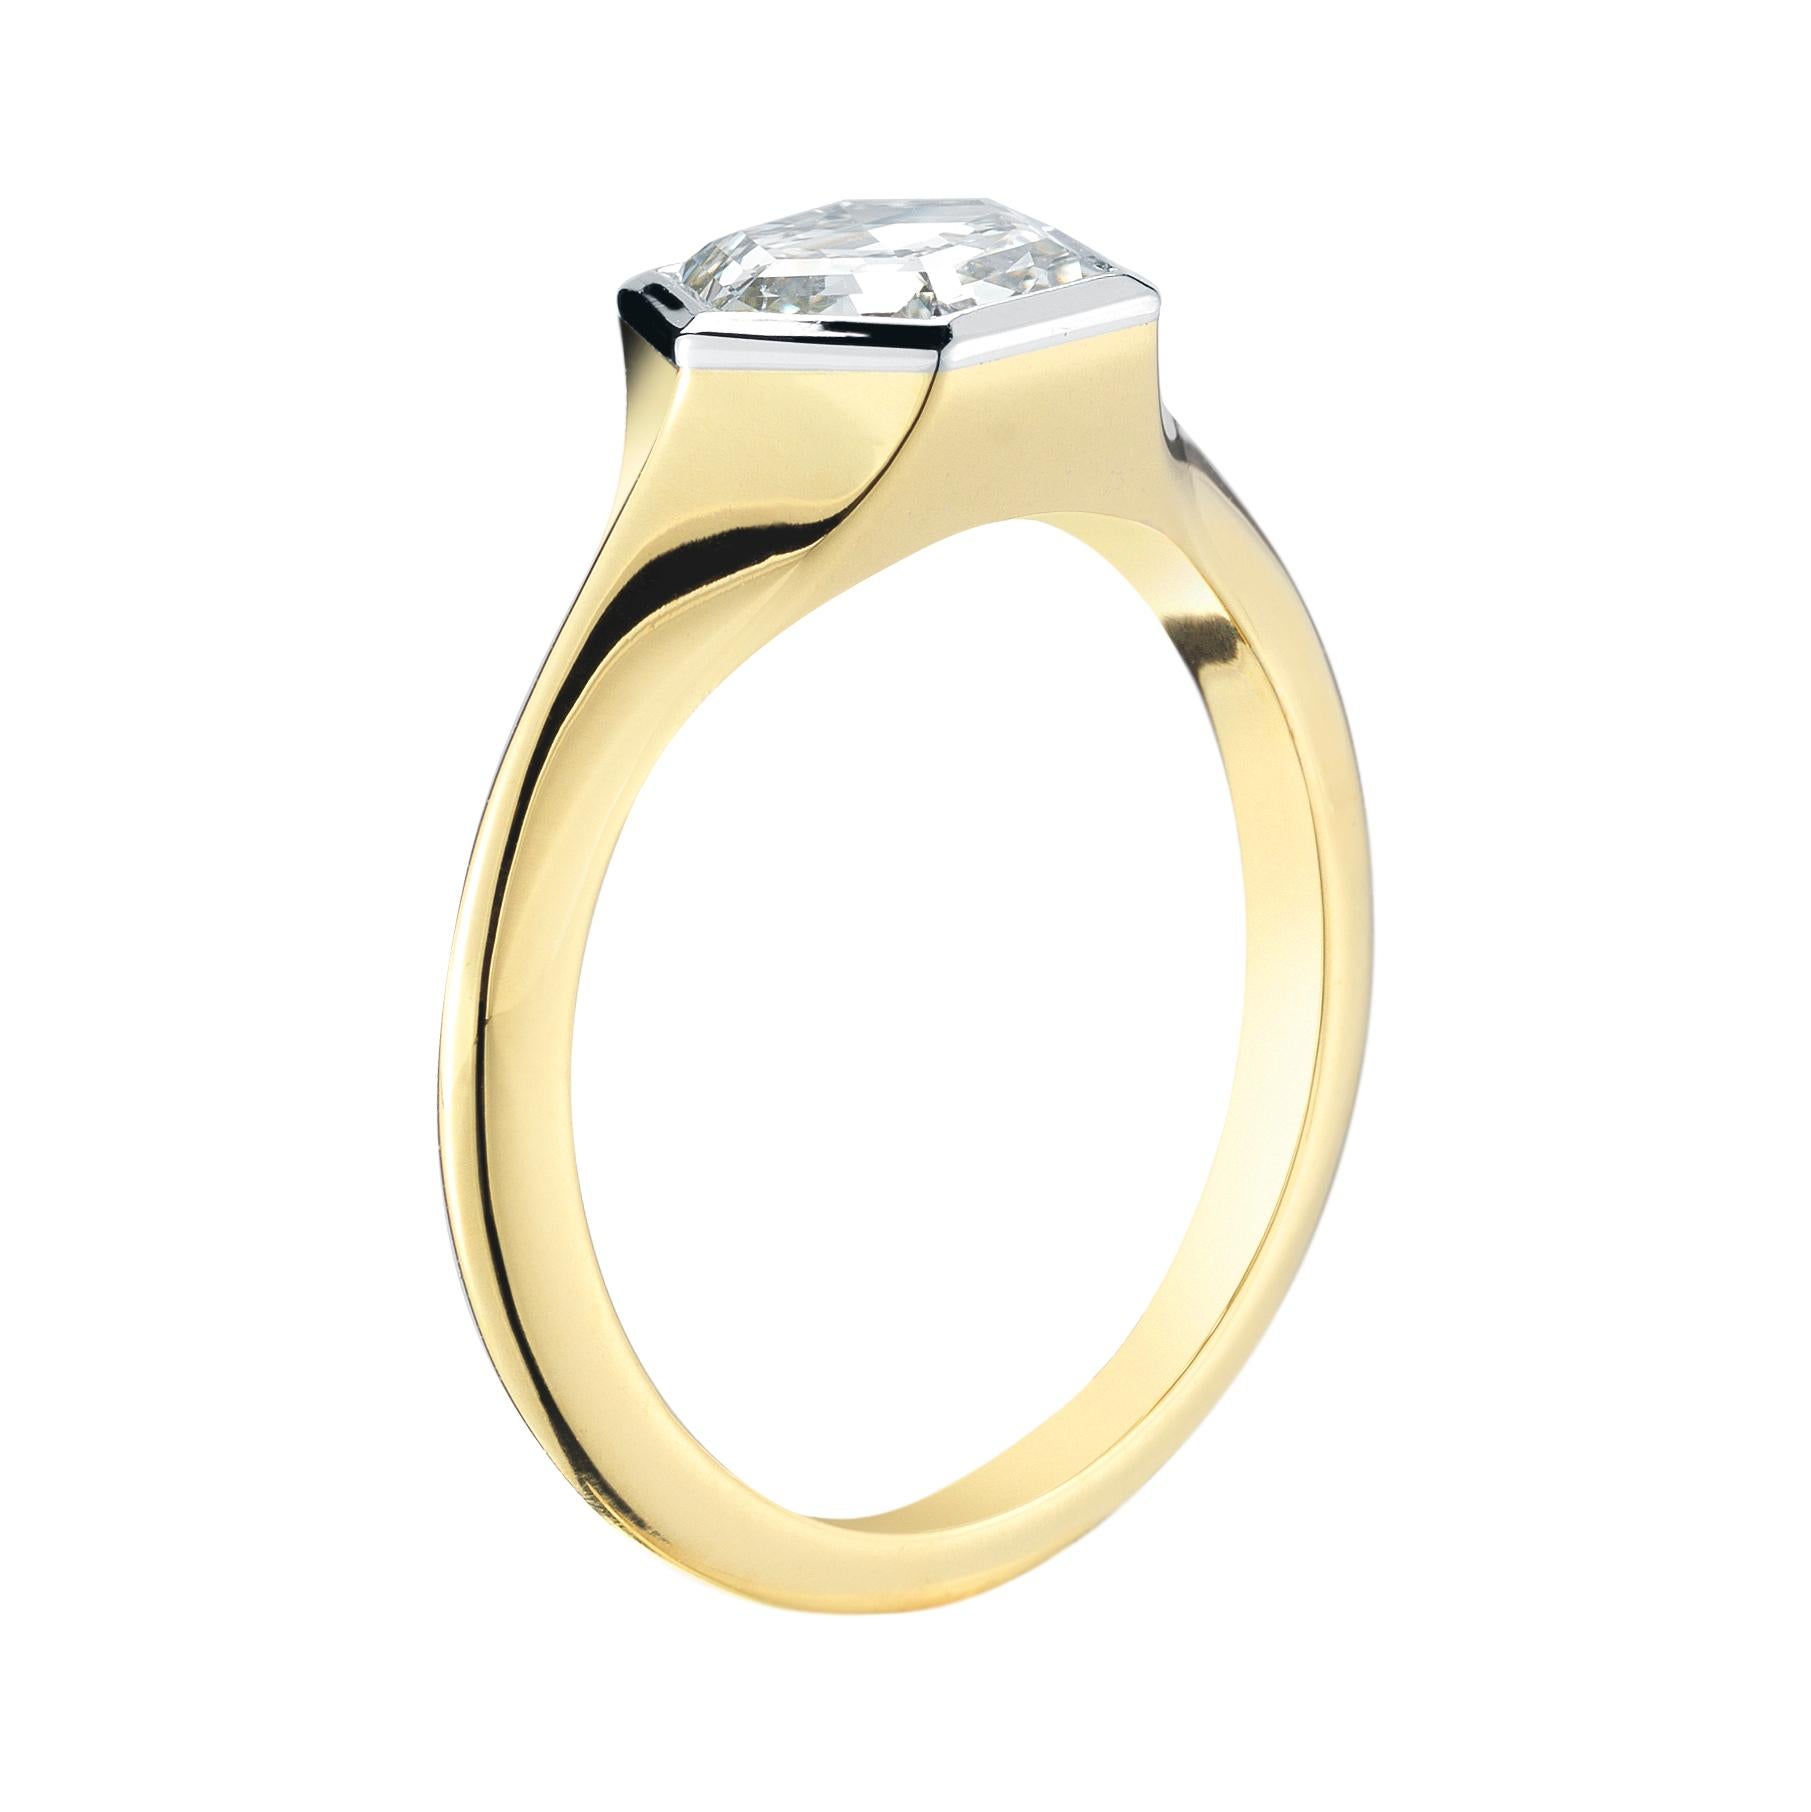 Custom Hexagon Diamond Engagement Ring. This sparkly step cut diamond is framed with platinum to enhance the size of the stone. The platinum bezel is fused to an 18k yellow gold knife edge band for an elegant and timeless look. 

Each ring is